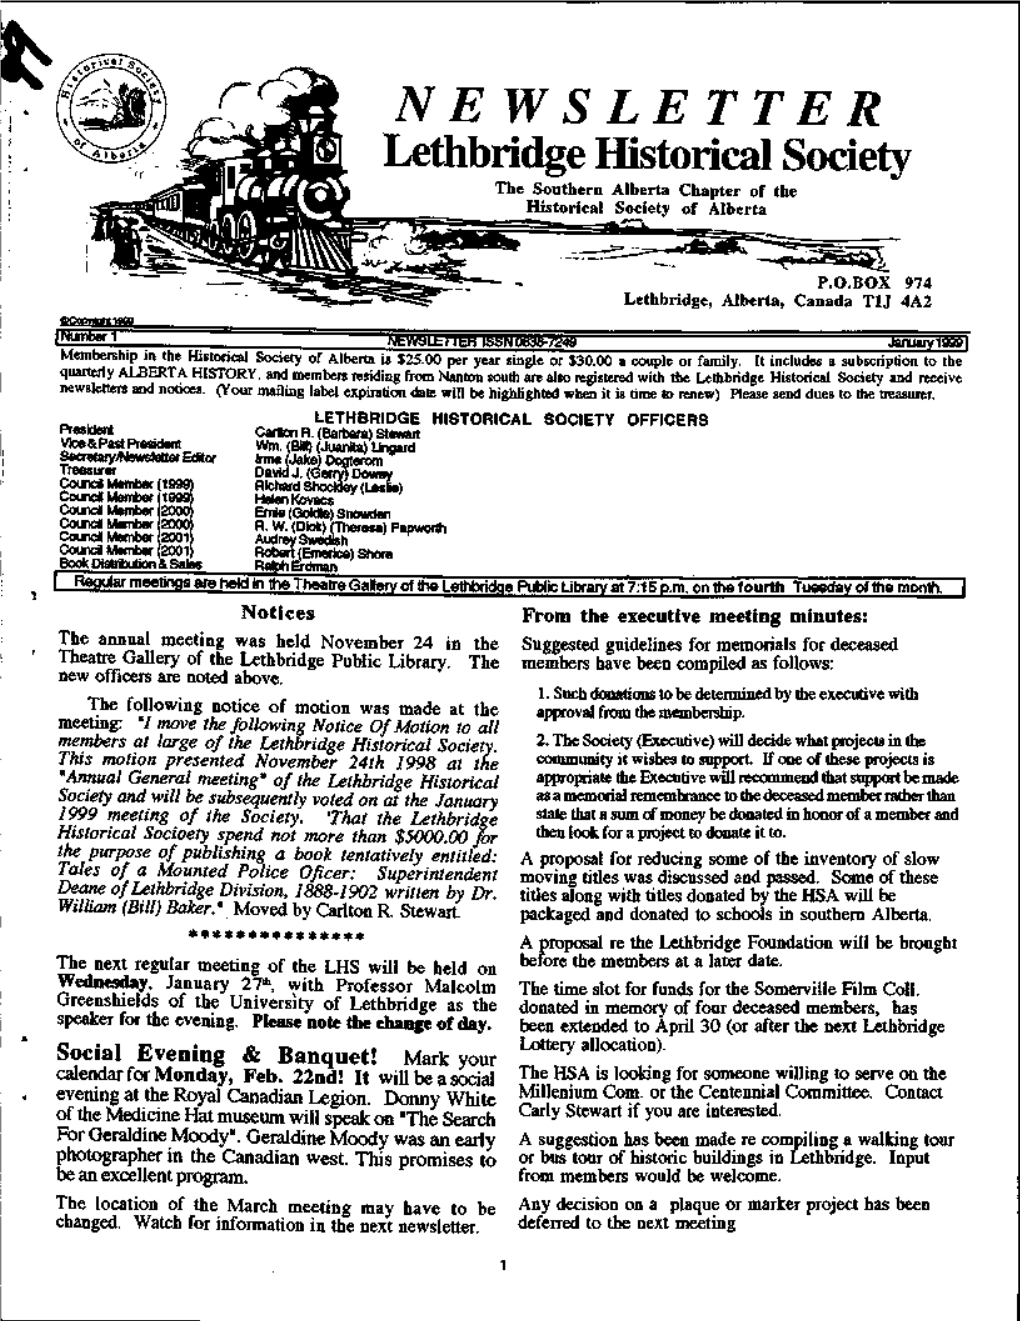 NEWSLETTER Lethbridge Historical Society the Southern Alberta Chapter of the Historical Society of Alberta